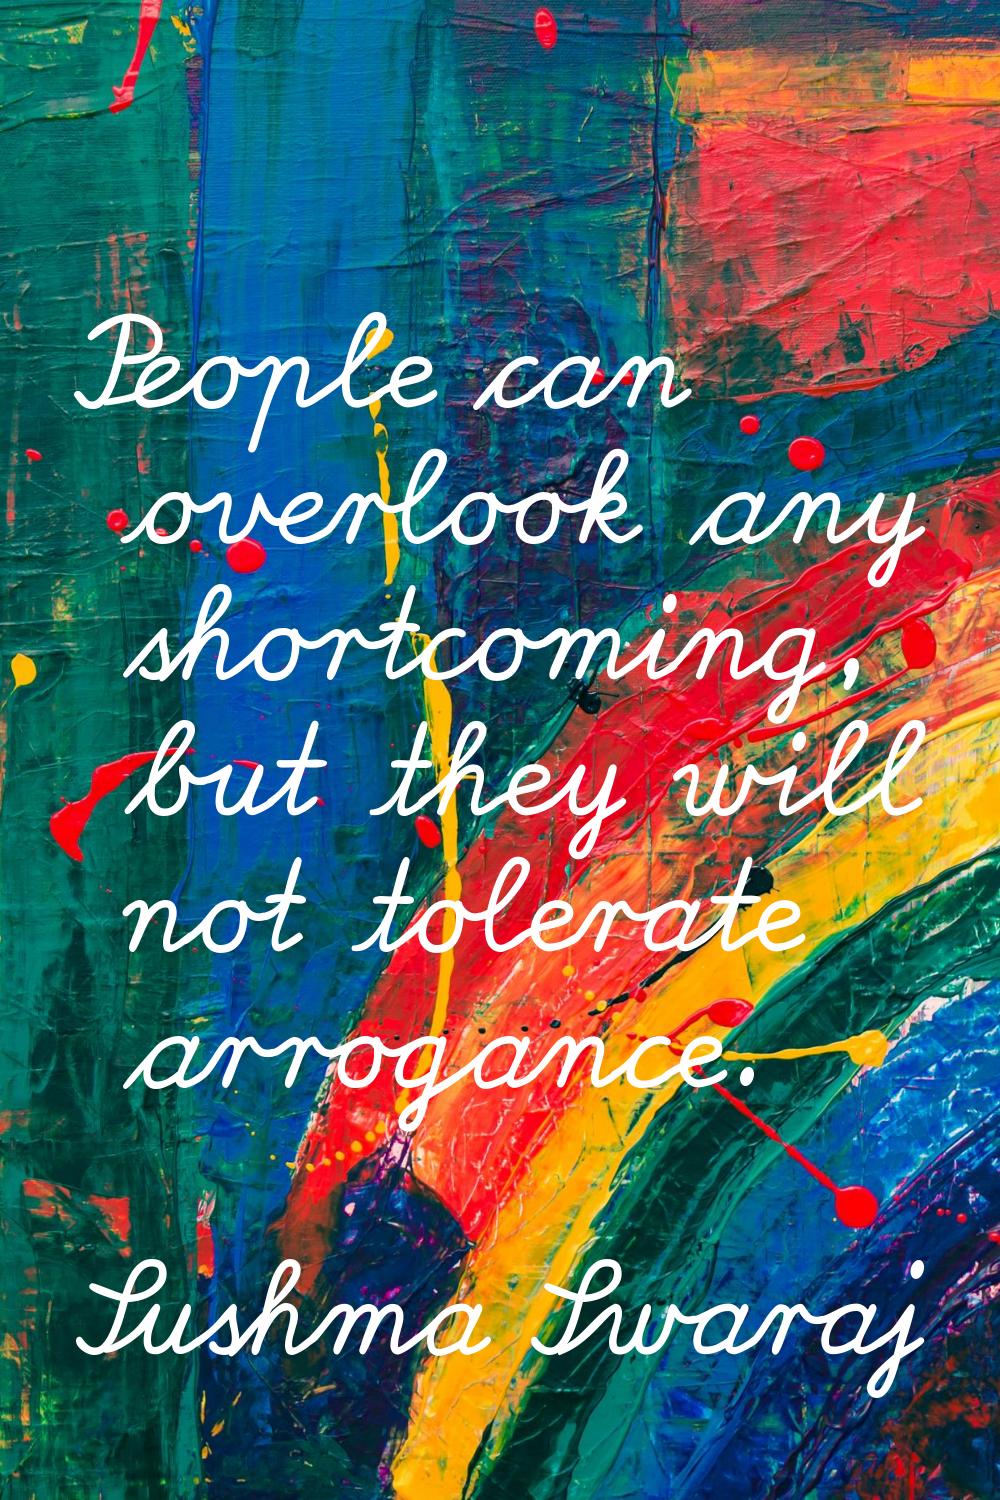 People can overlook any shortcoming, but they will not tolerate arrogance.